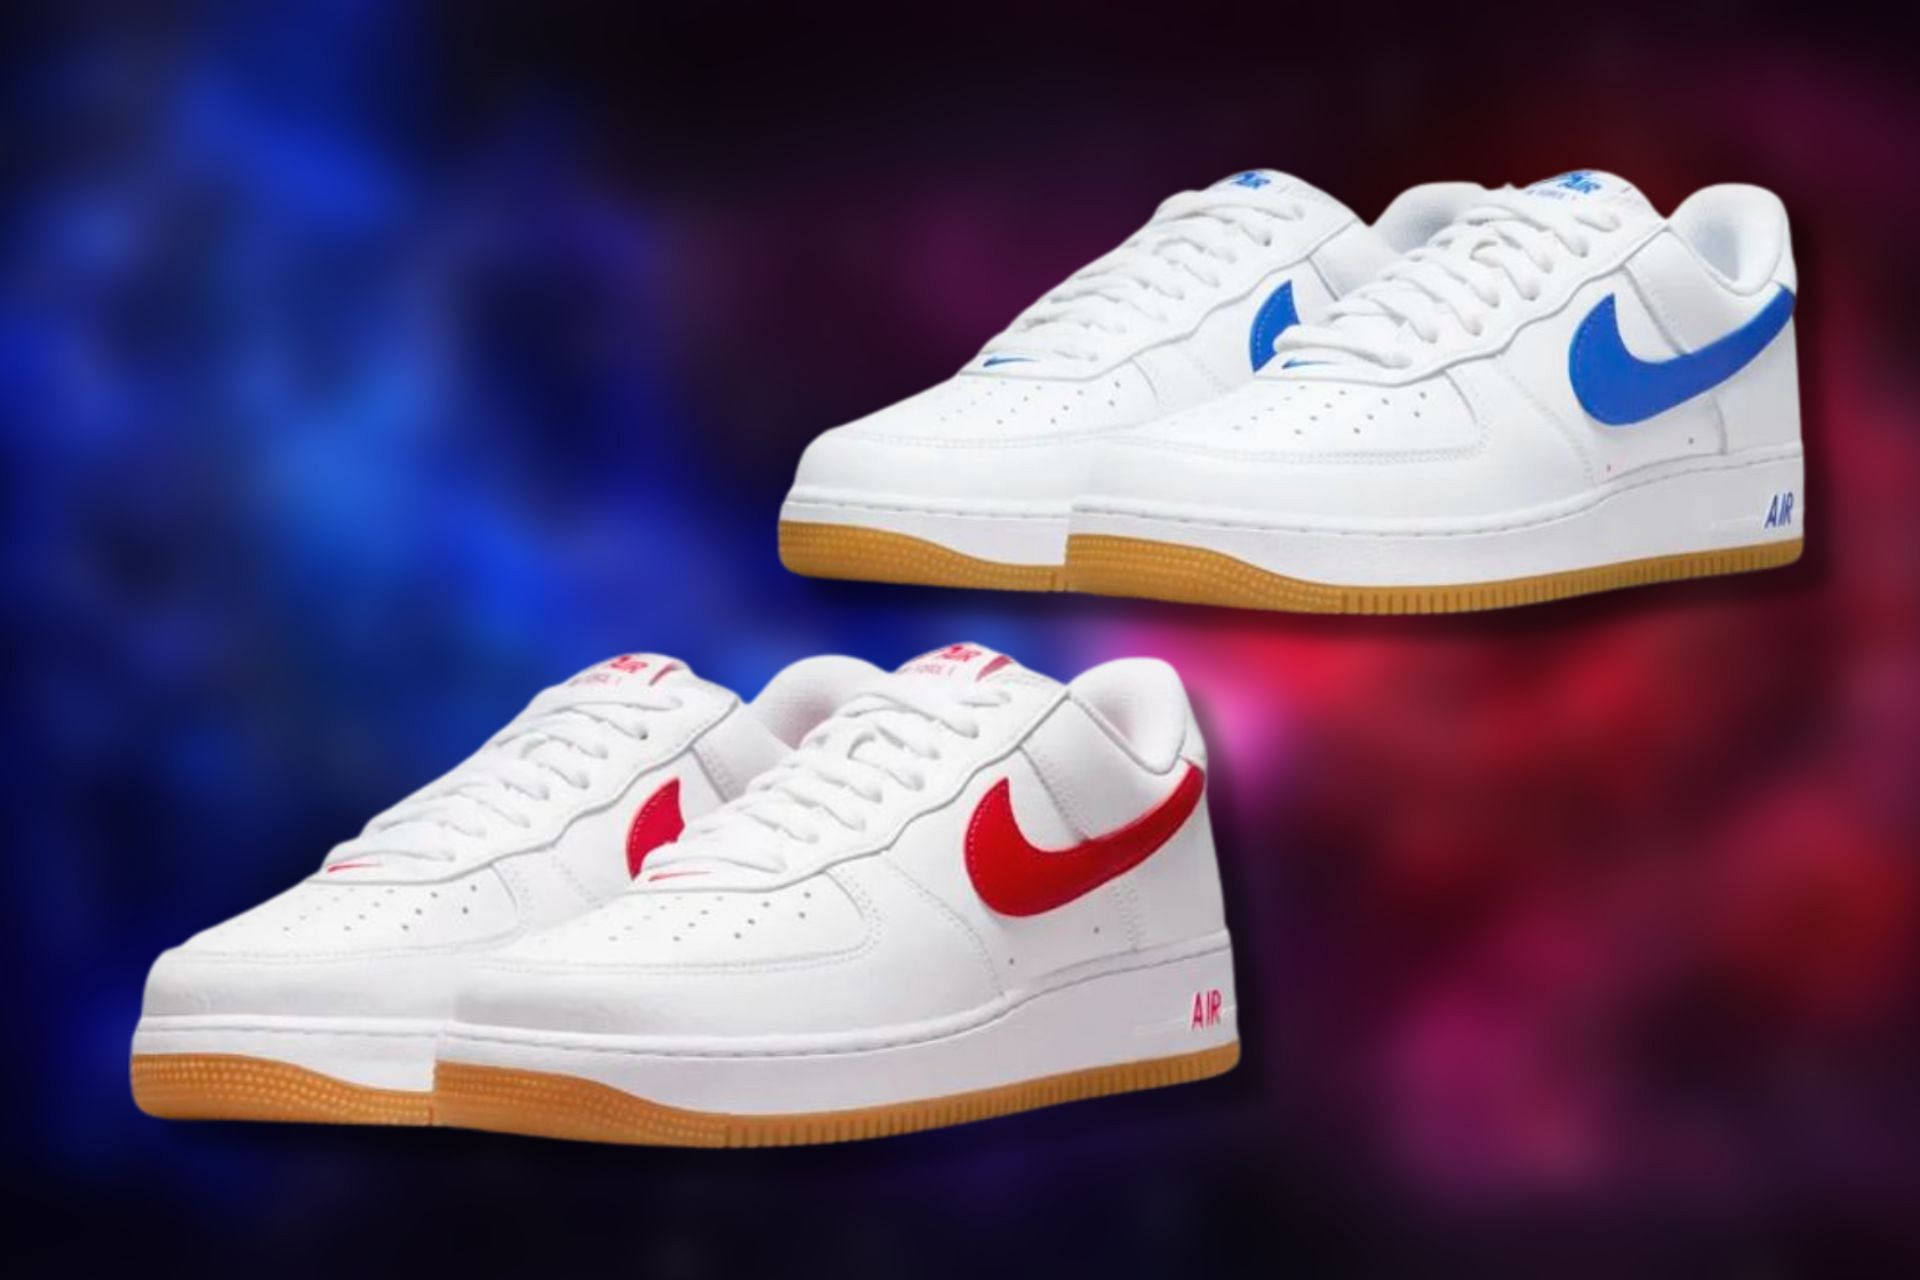 Nike Air Force 1 Low Color of the Month University Blue and University Red colorways (Image via Sportskeeda)